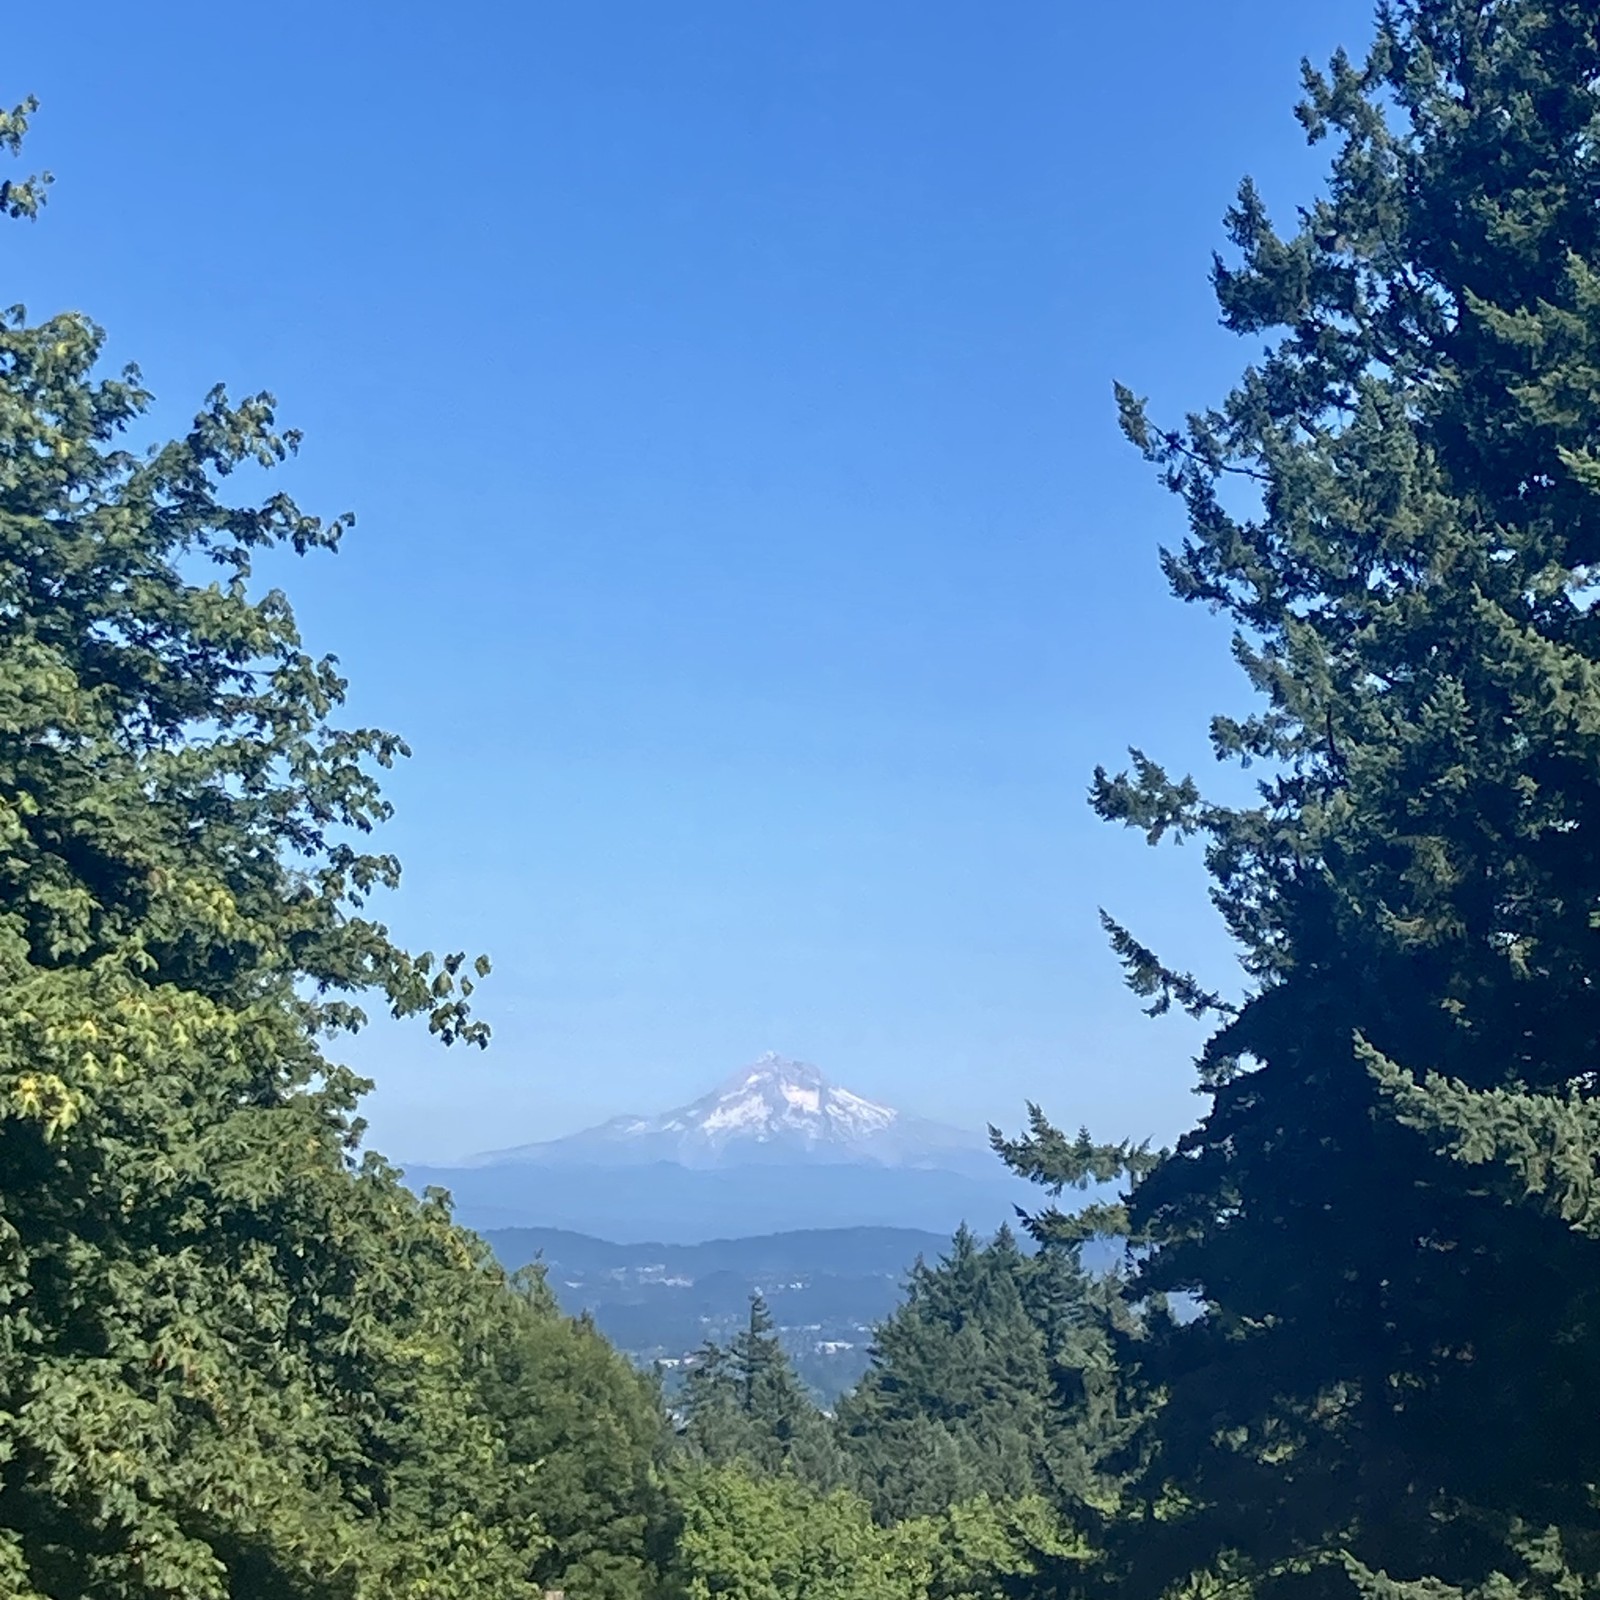 Mount hood as seen from Council Crest Park. The mountain is sharp under a clear, hot summer sky